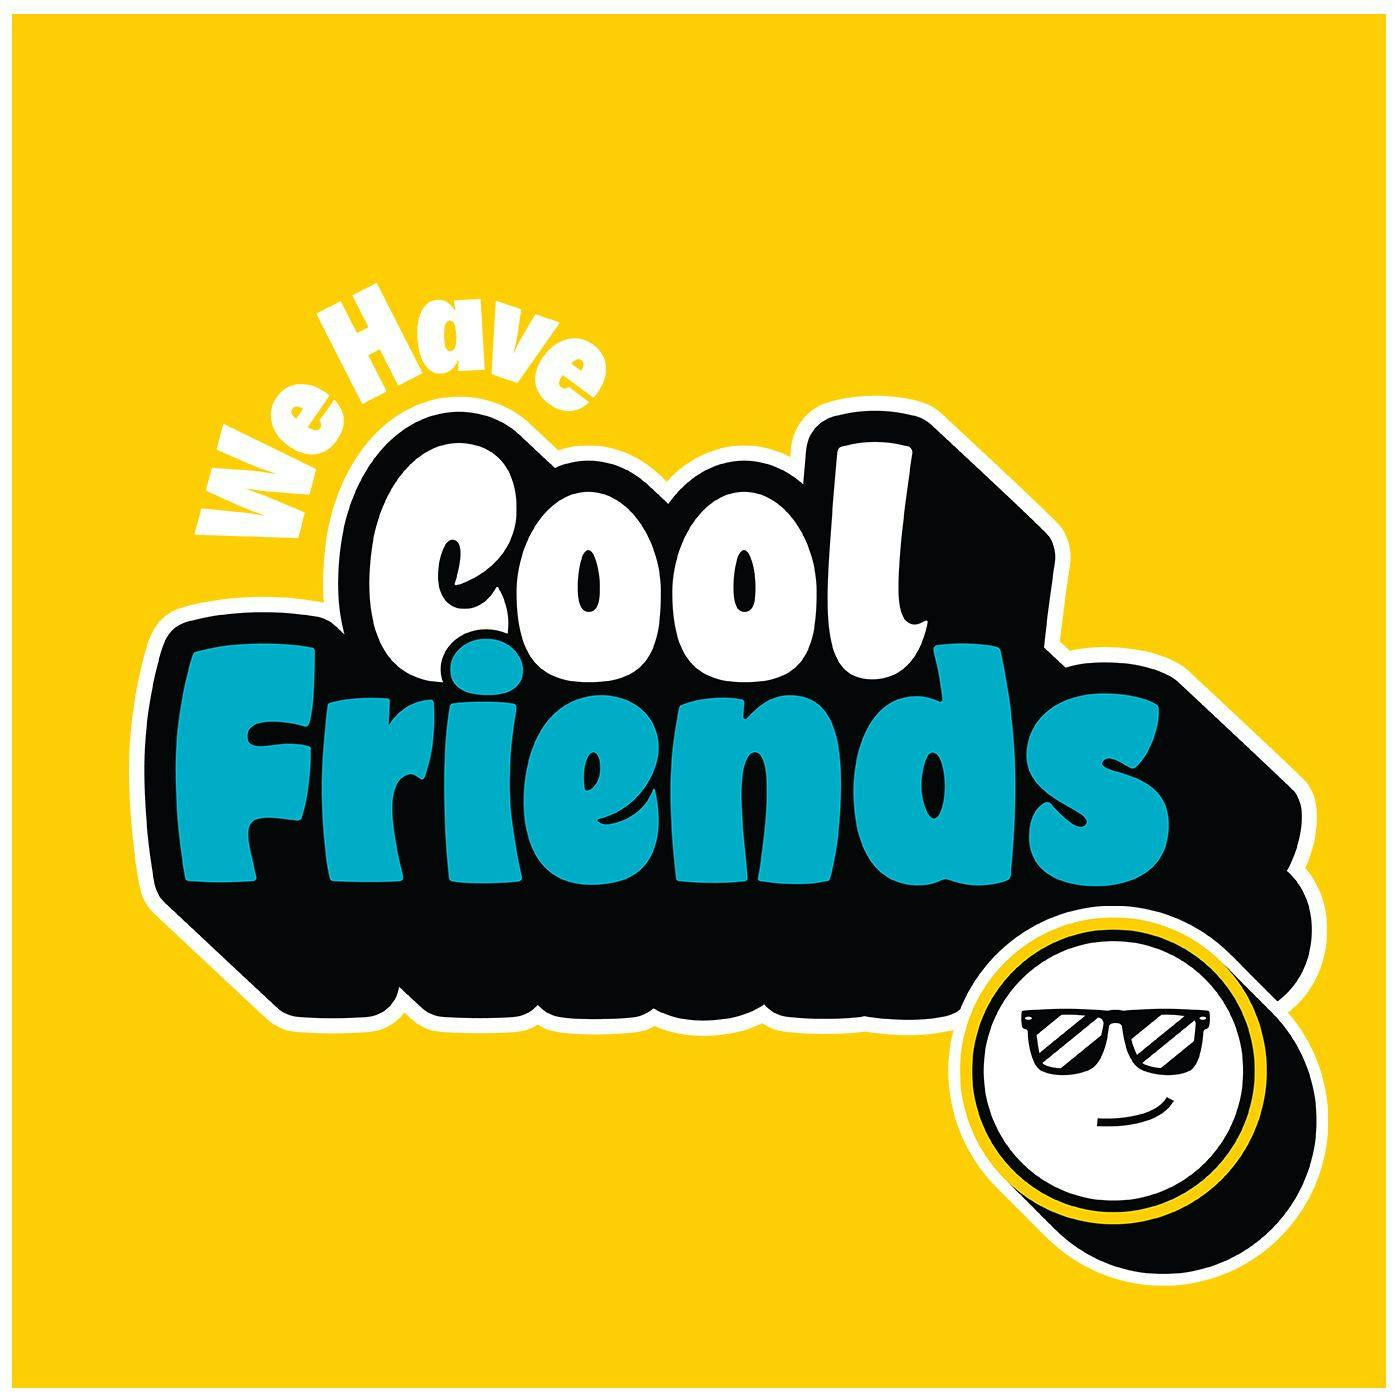 Naomi Kyle's Hosting Advice - We Have Cool Friends